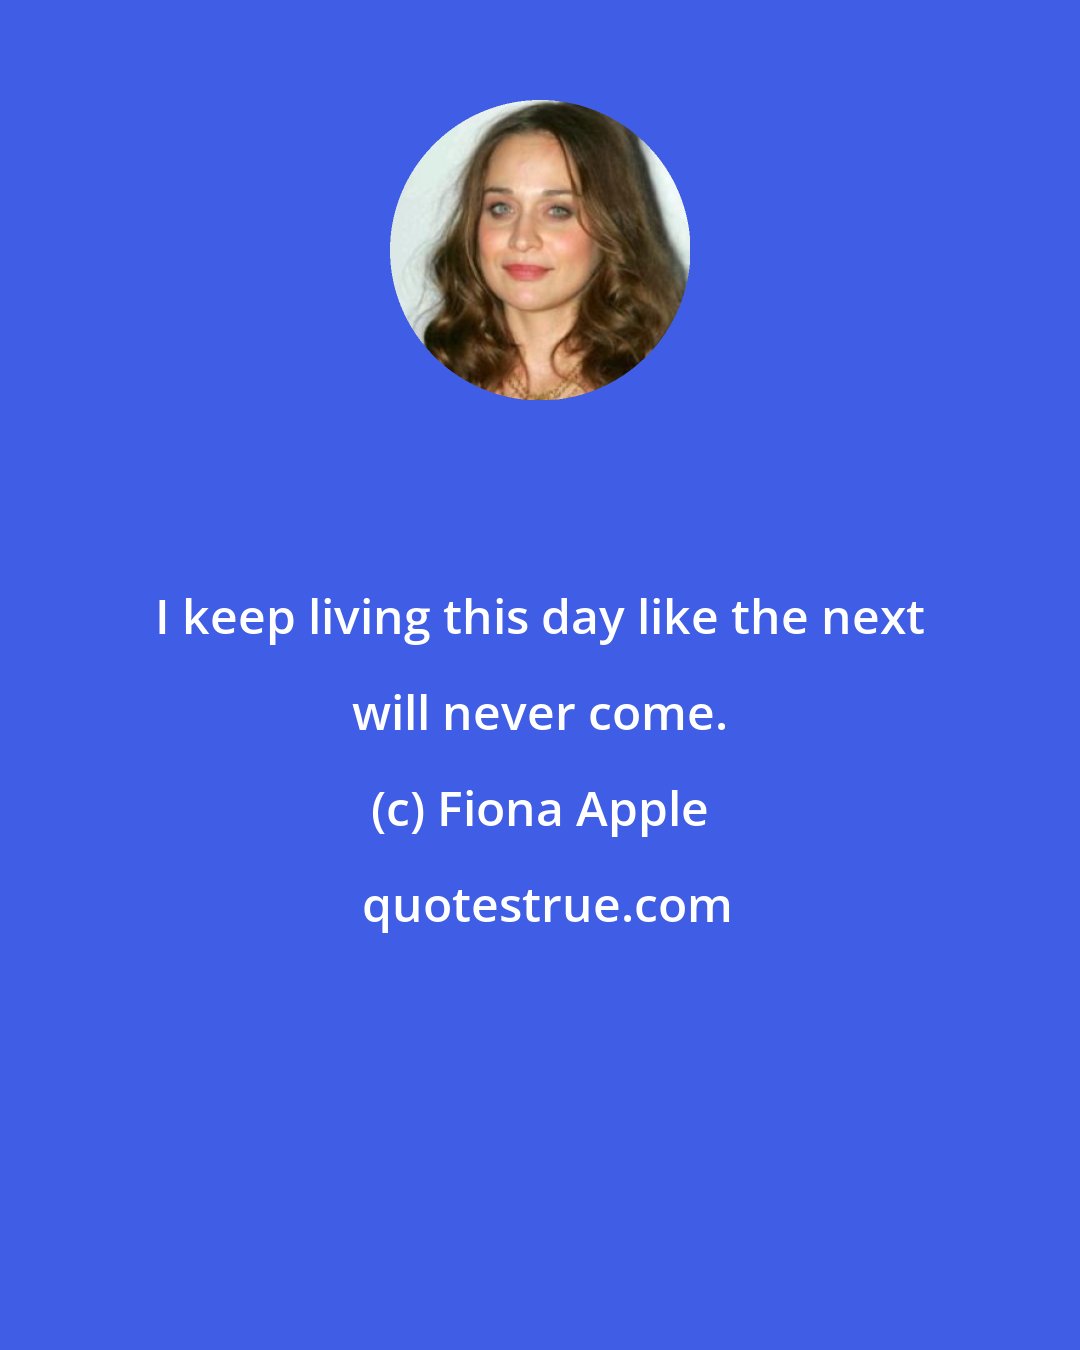 Fiona Apple: I keep living this day like the next will never come.